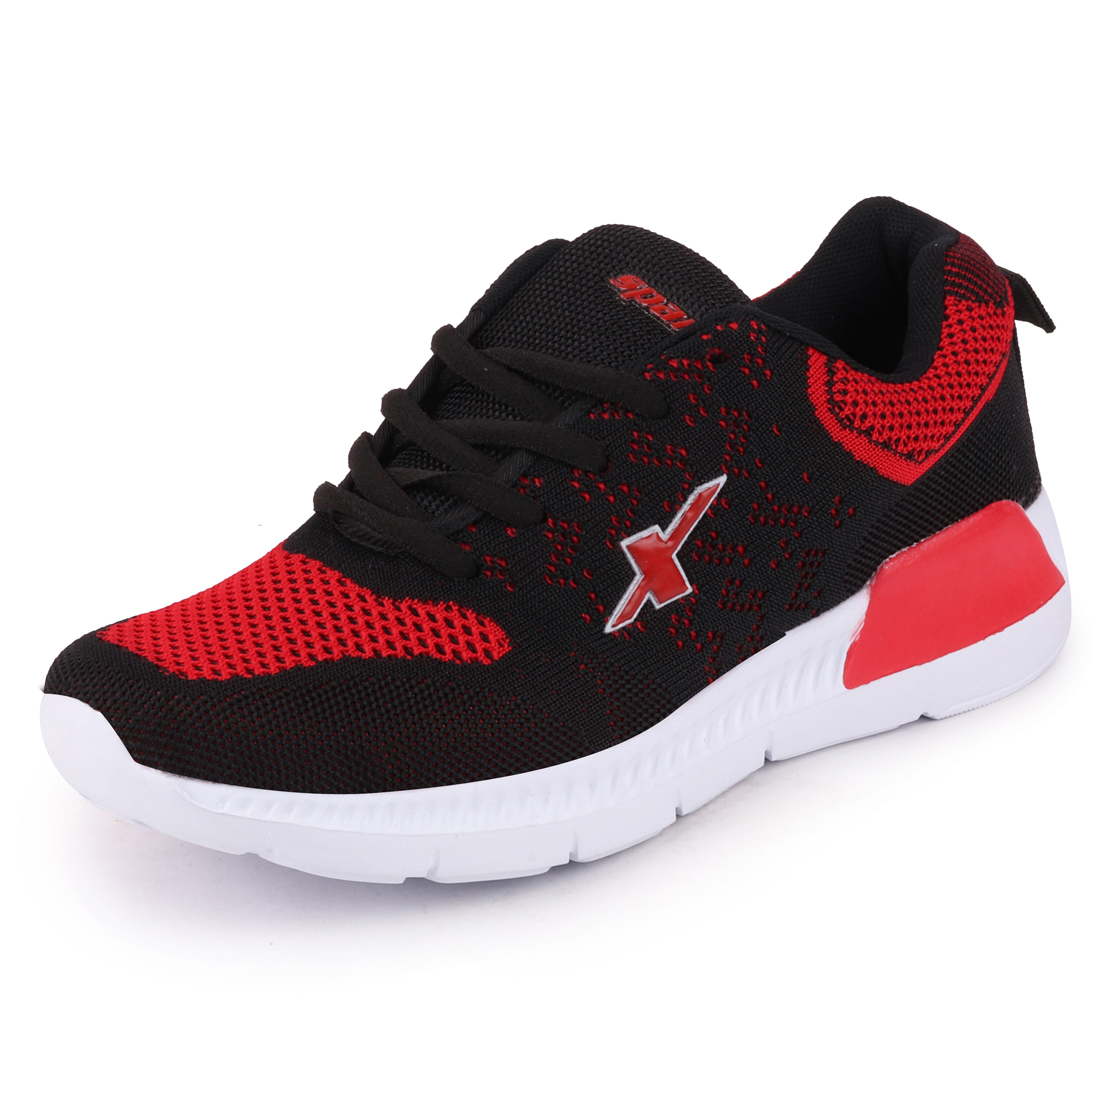 Buy Sparx Women Black Red Running Shoes Online @ ₹949 from ShopClues